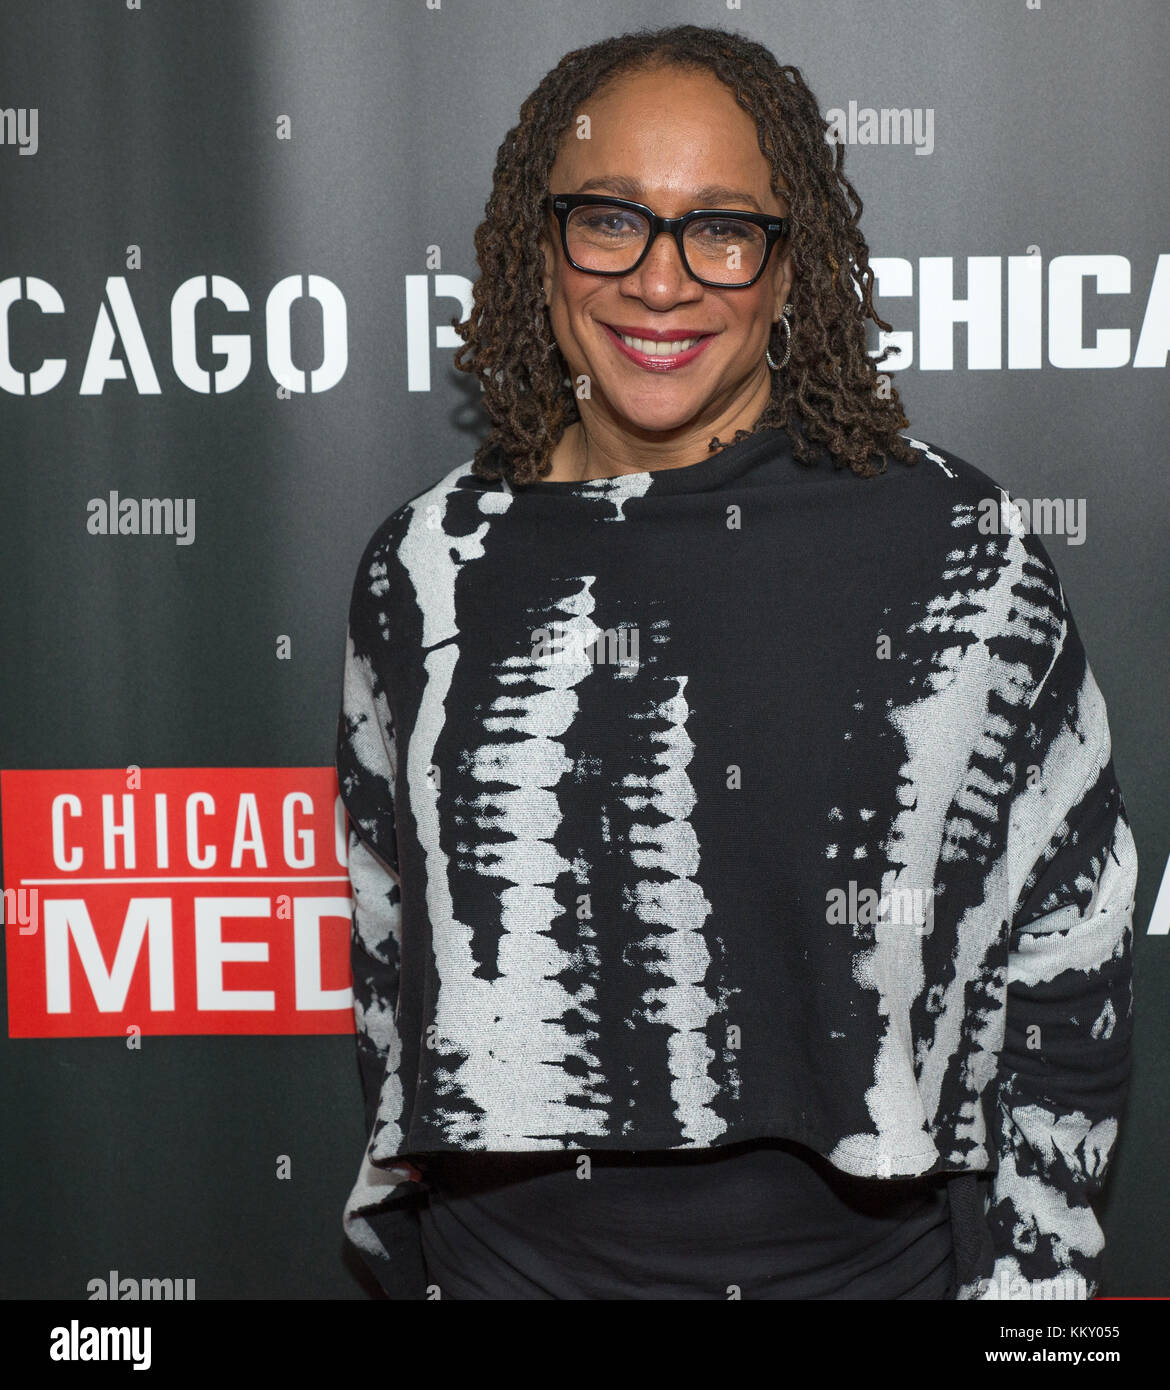 3rd annual NBC One Chicago Party featuring cast members from Chicago Fire, Chicago Med and Chicago P.D - Arrivals  Featuring: S. Epatha Merkerson Where: Chicago, Illinois, United States When: 30 Oct 2017 Credit: WENN Stock Photo